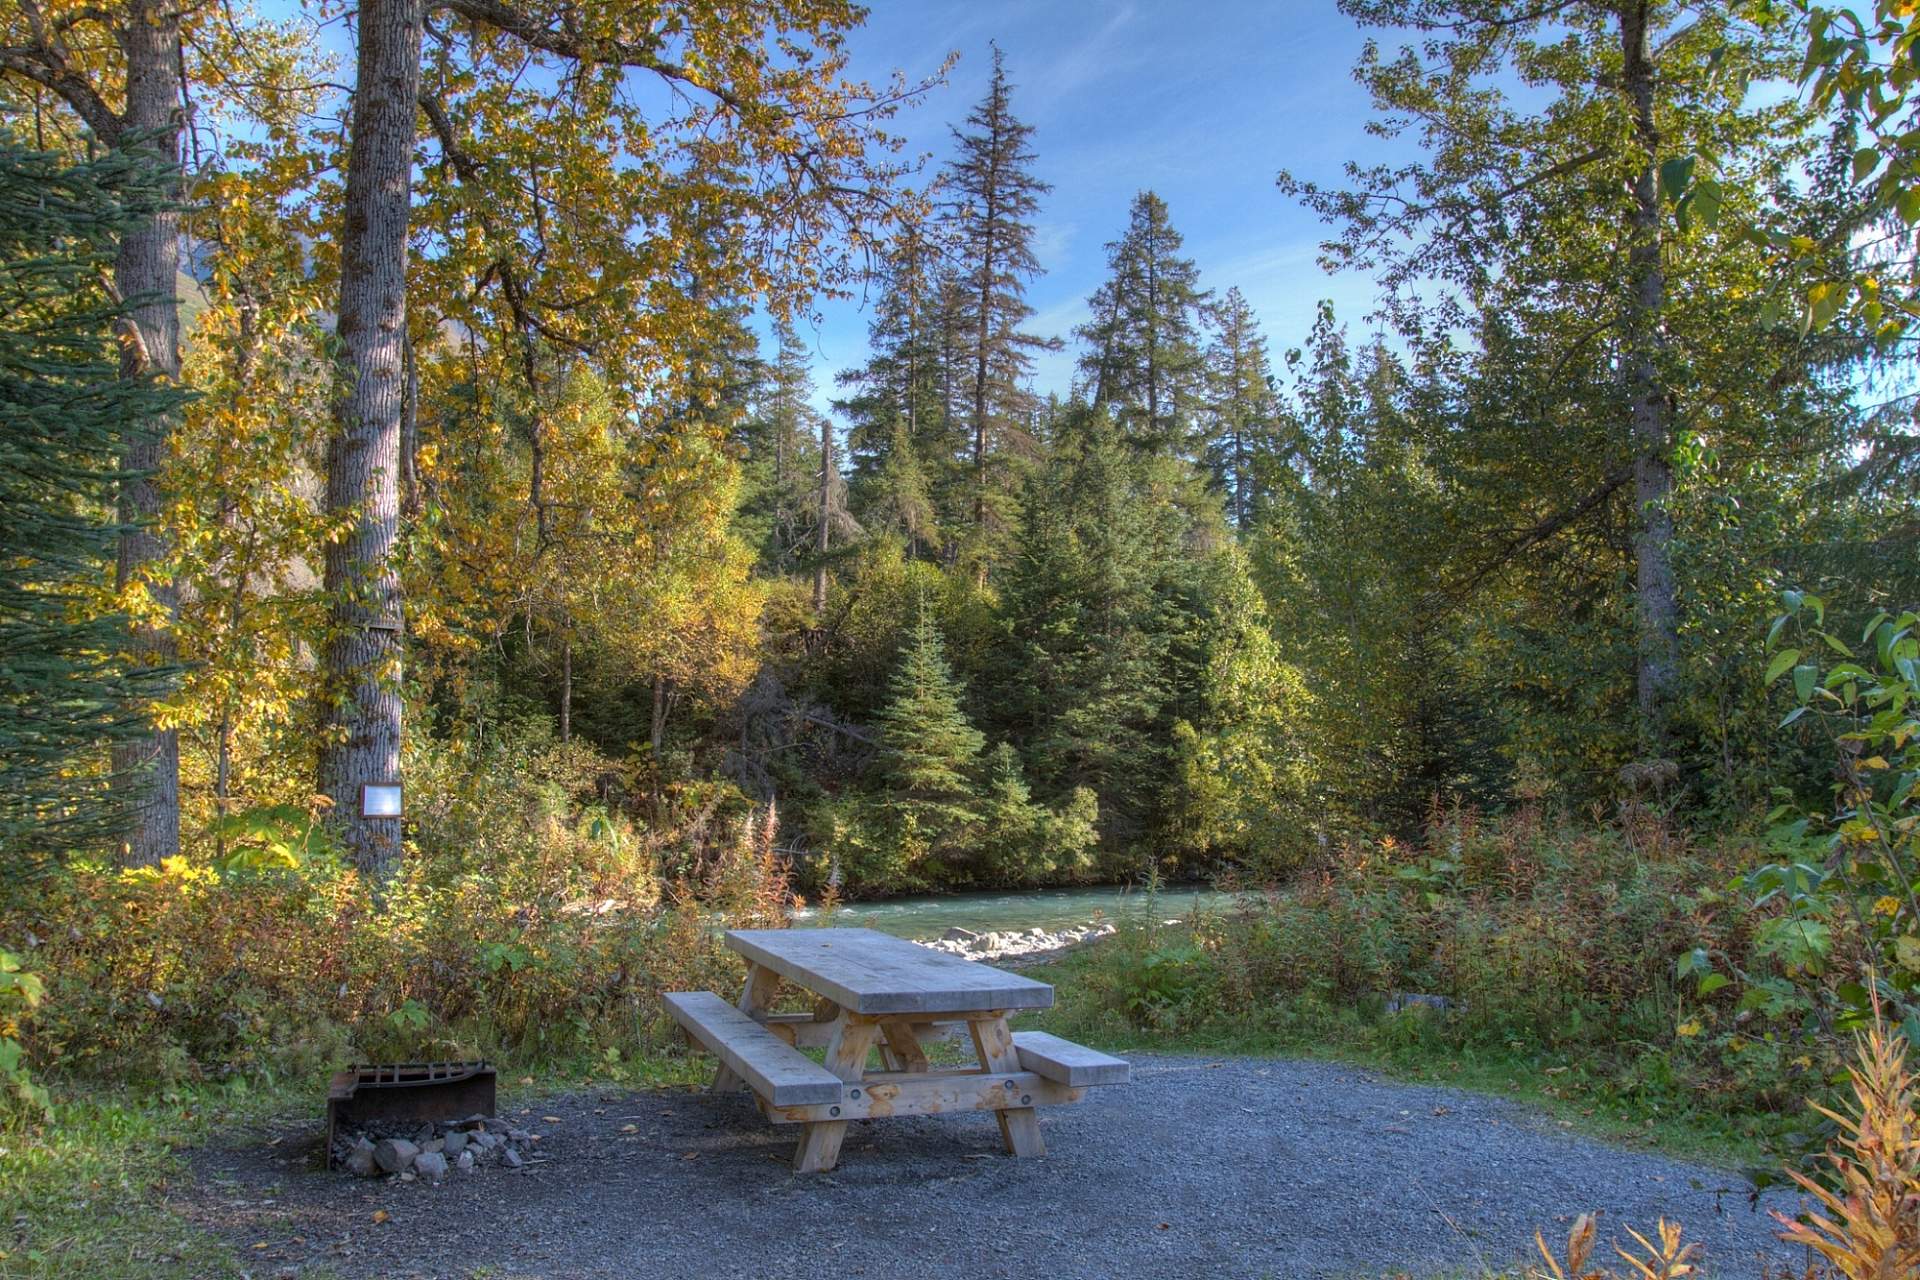 A picnic table in a forest setting at Ptarmigan Creek Campground